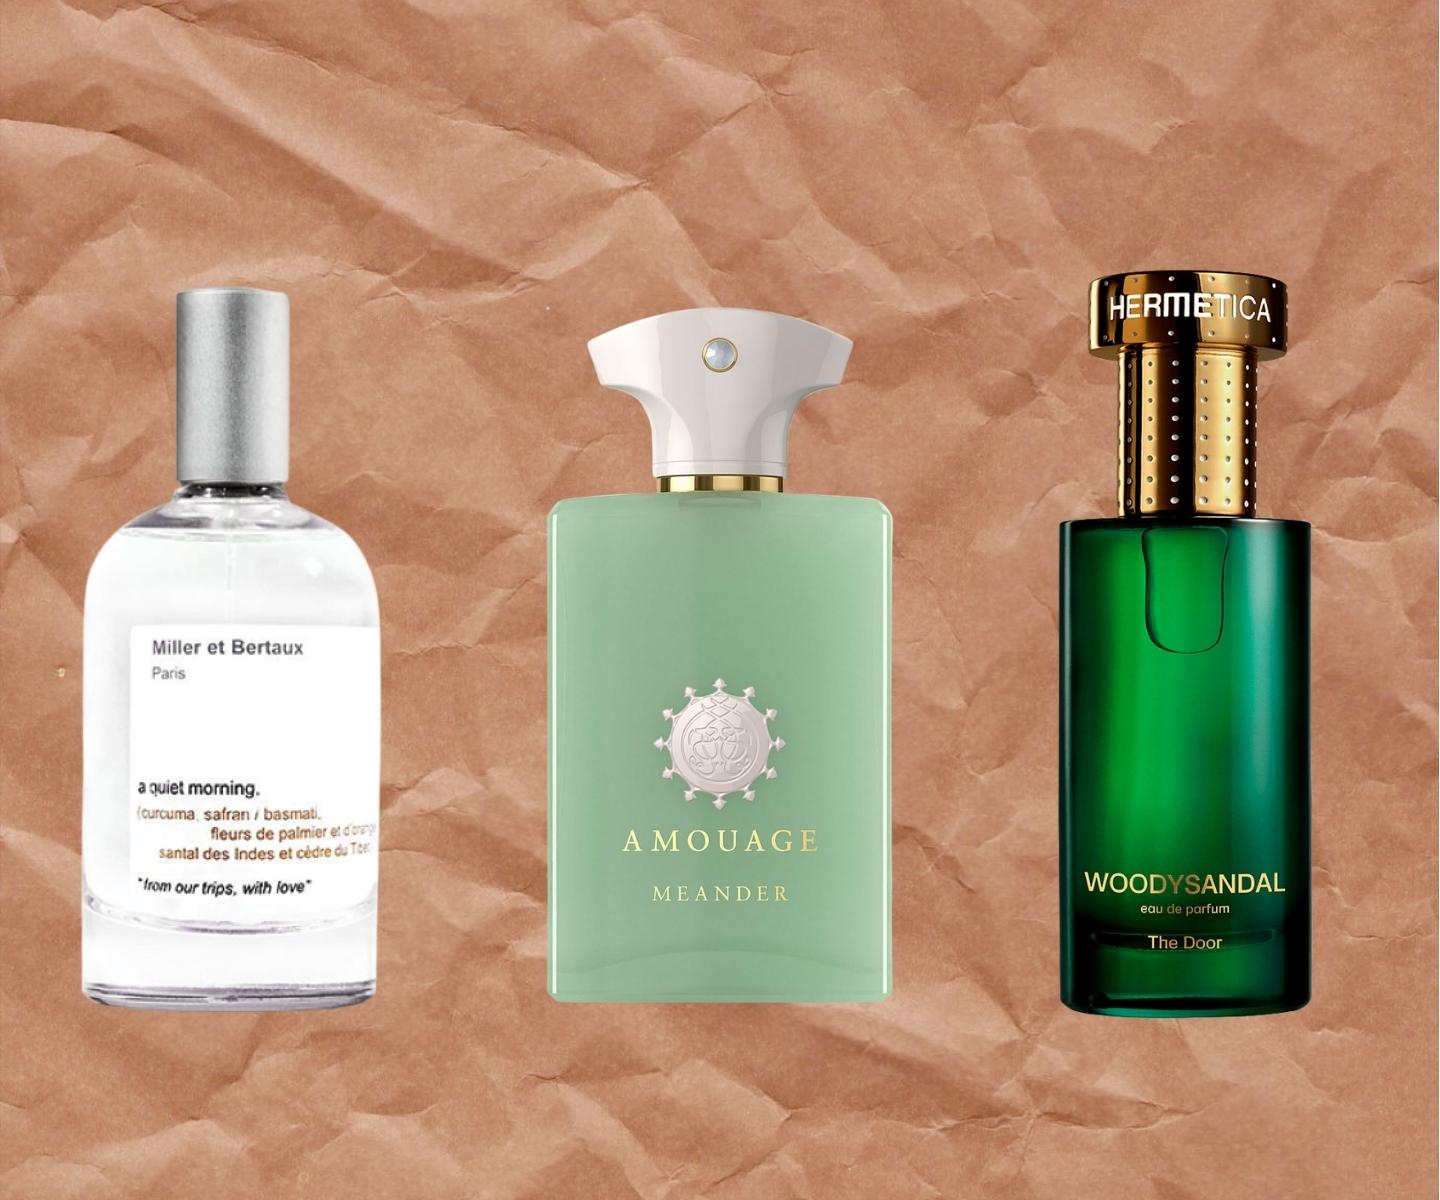 The best way to try our perfumes, and find your perfect scent